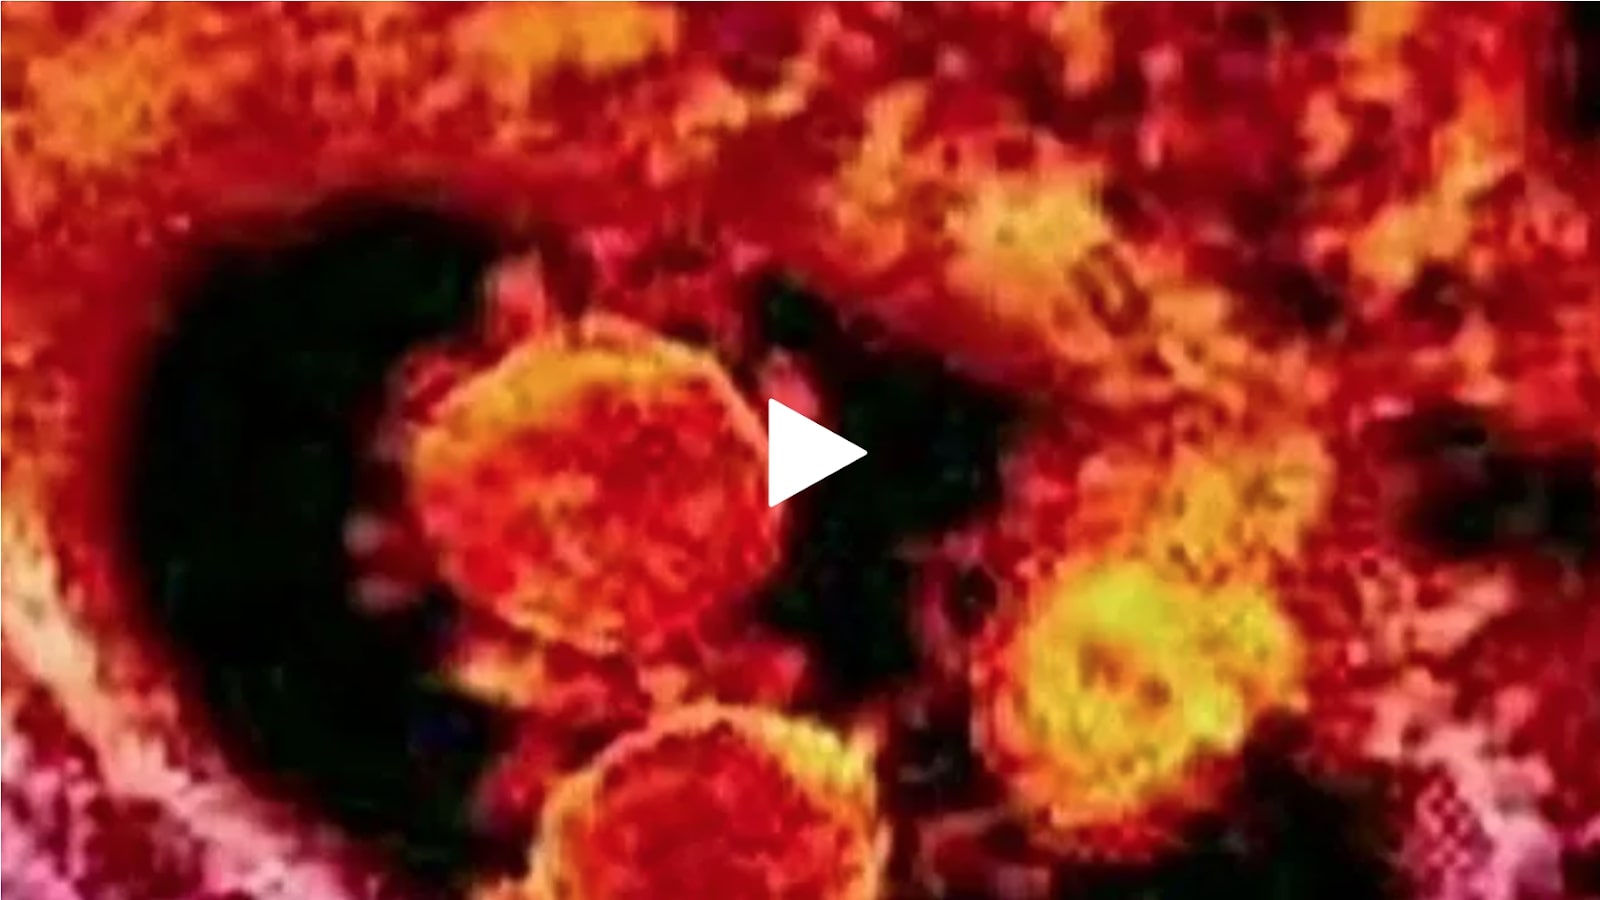 Fox News Protecting America from MERS and other biological threats